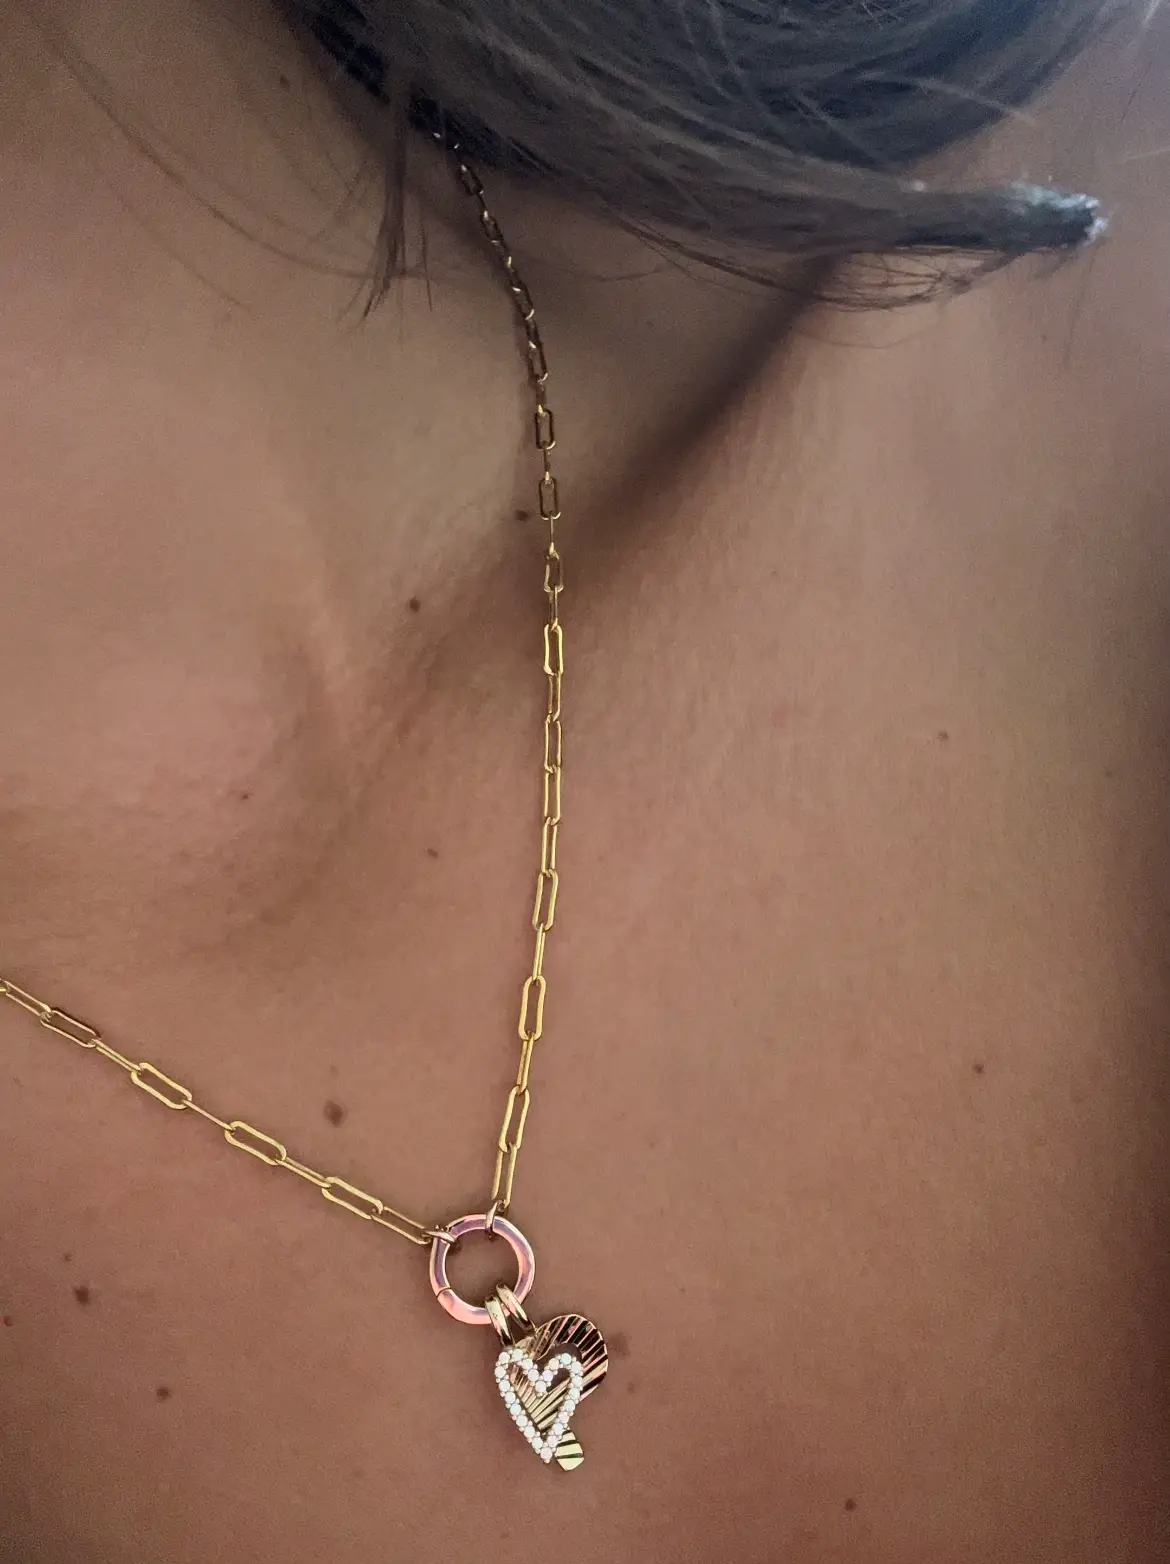 jewels, off, heart, chain, jewelry, necklace, gold, cute, jewelry, fuck you  necklace, fuck off, tumblr, necklace, heart jewelry, gold necklace, gold,  girly, style, small - Wheretoget